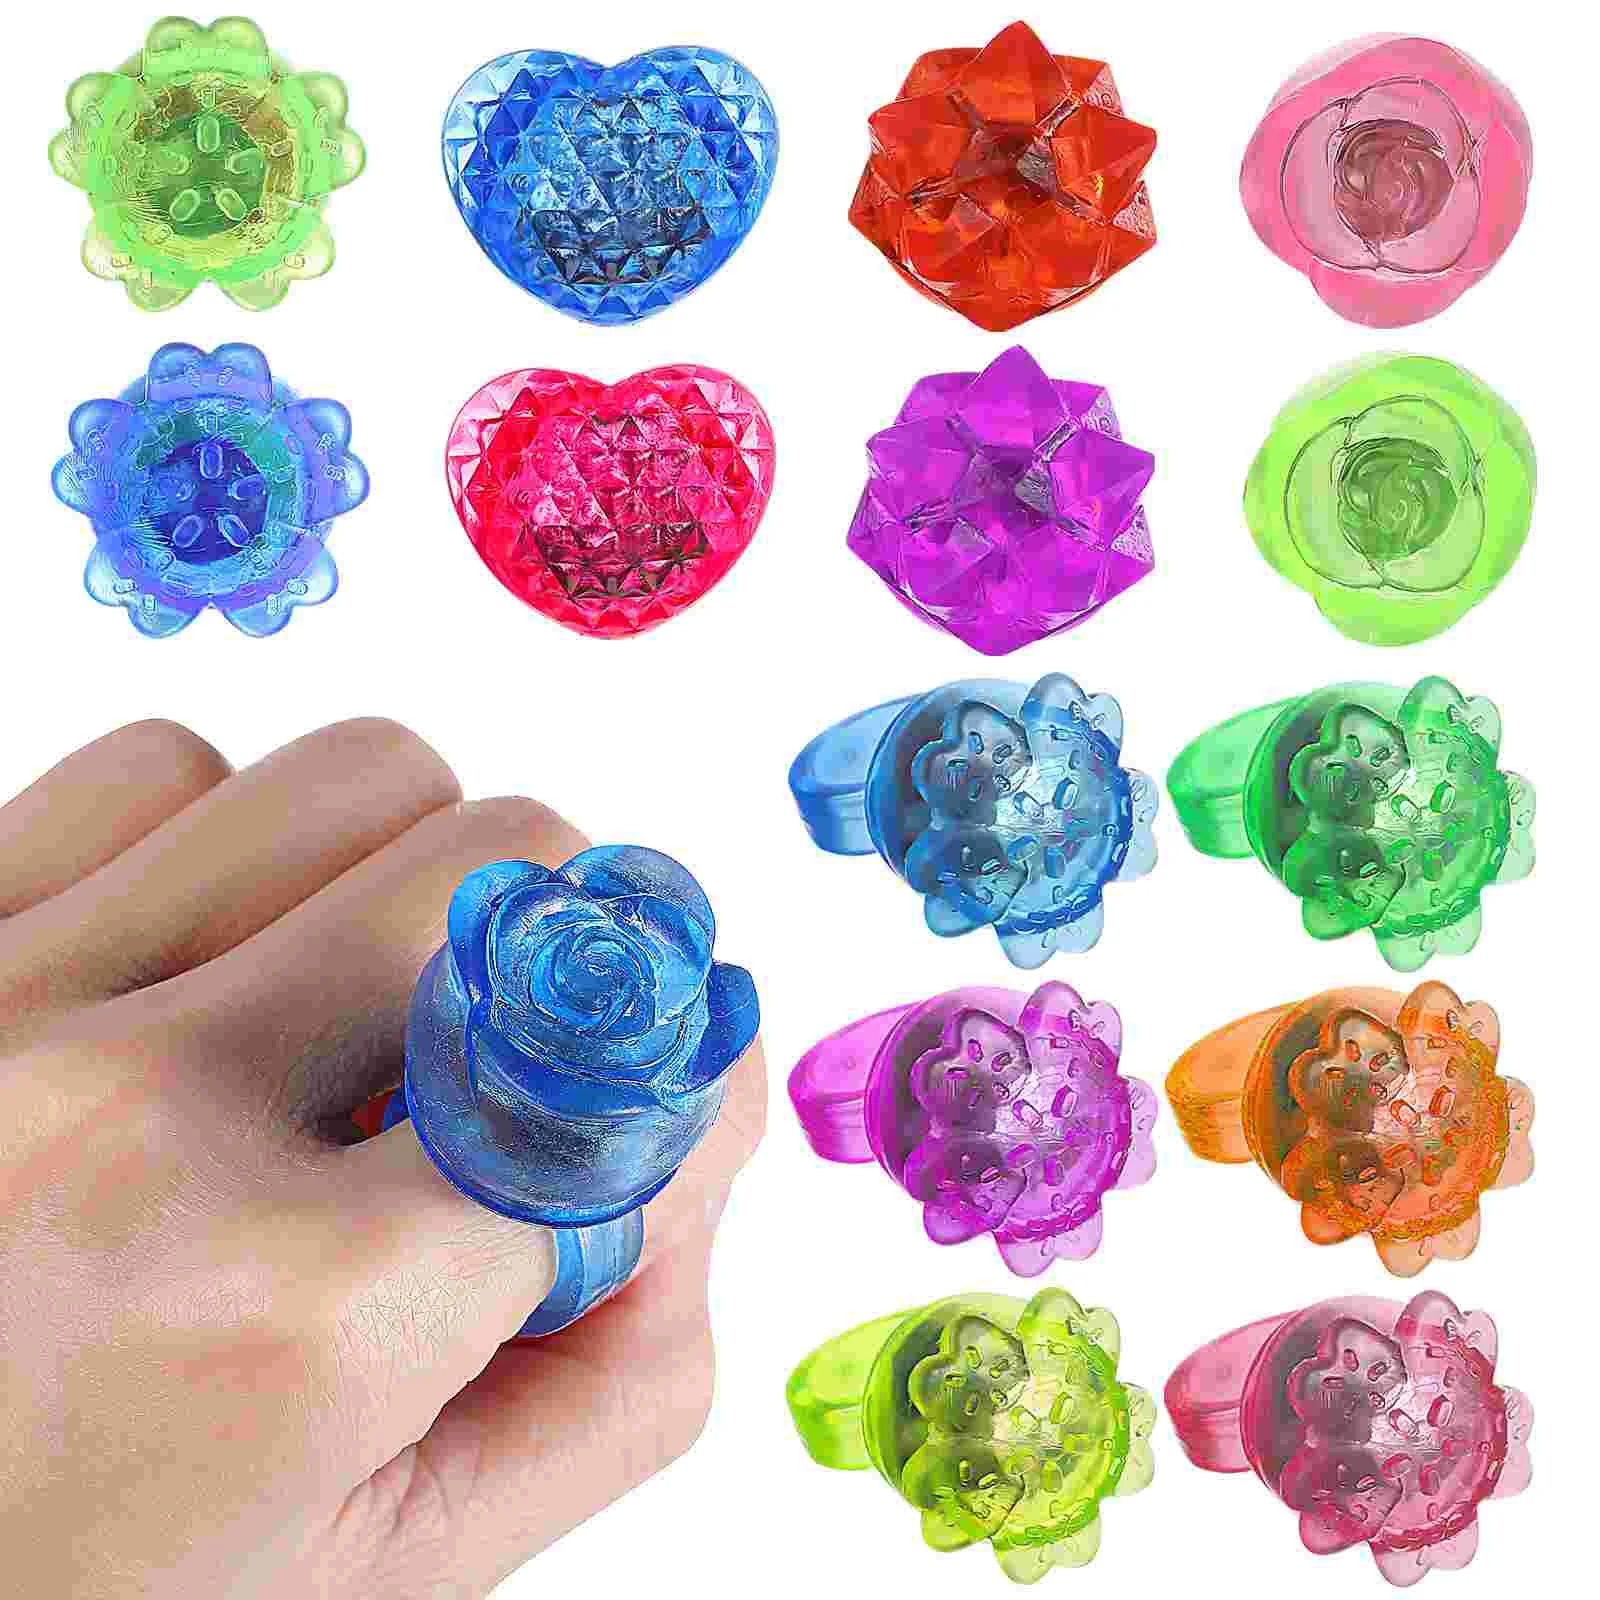 

Halo Toys Strawberry Jelly Strawberry Jelly 24Pcs LED Light Up Rings, Flower Shape Flashing Rings Finger Novelty Glow in the